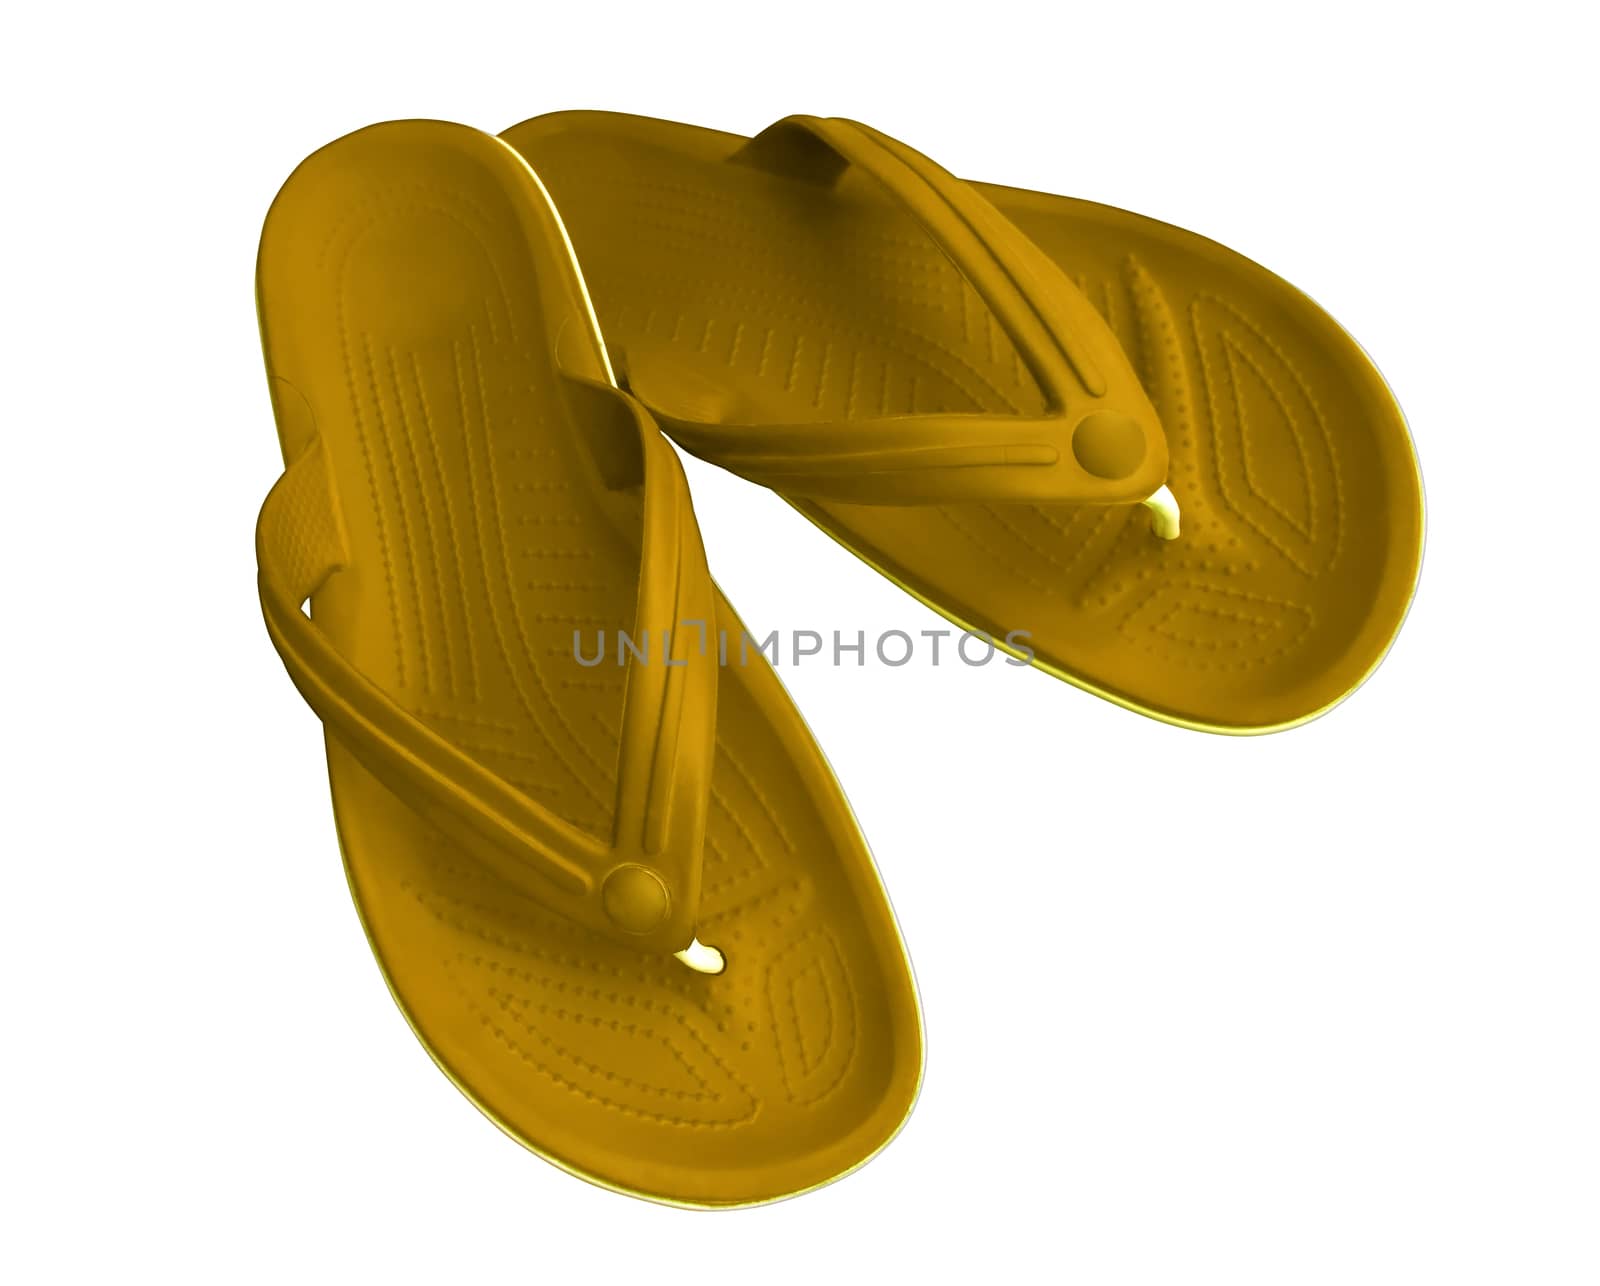 Yellow rubber slippers isolated on a white. Clipping Path included.